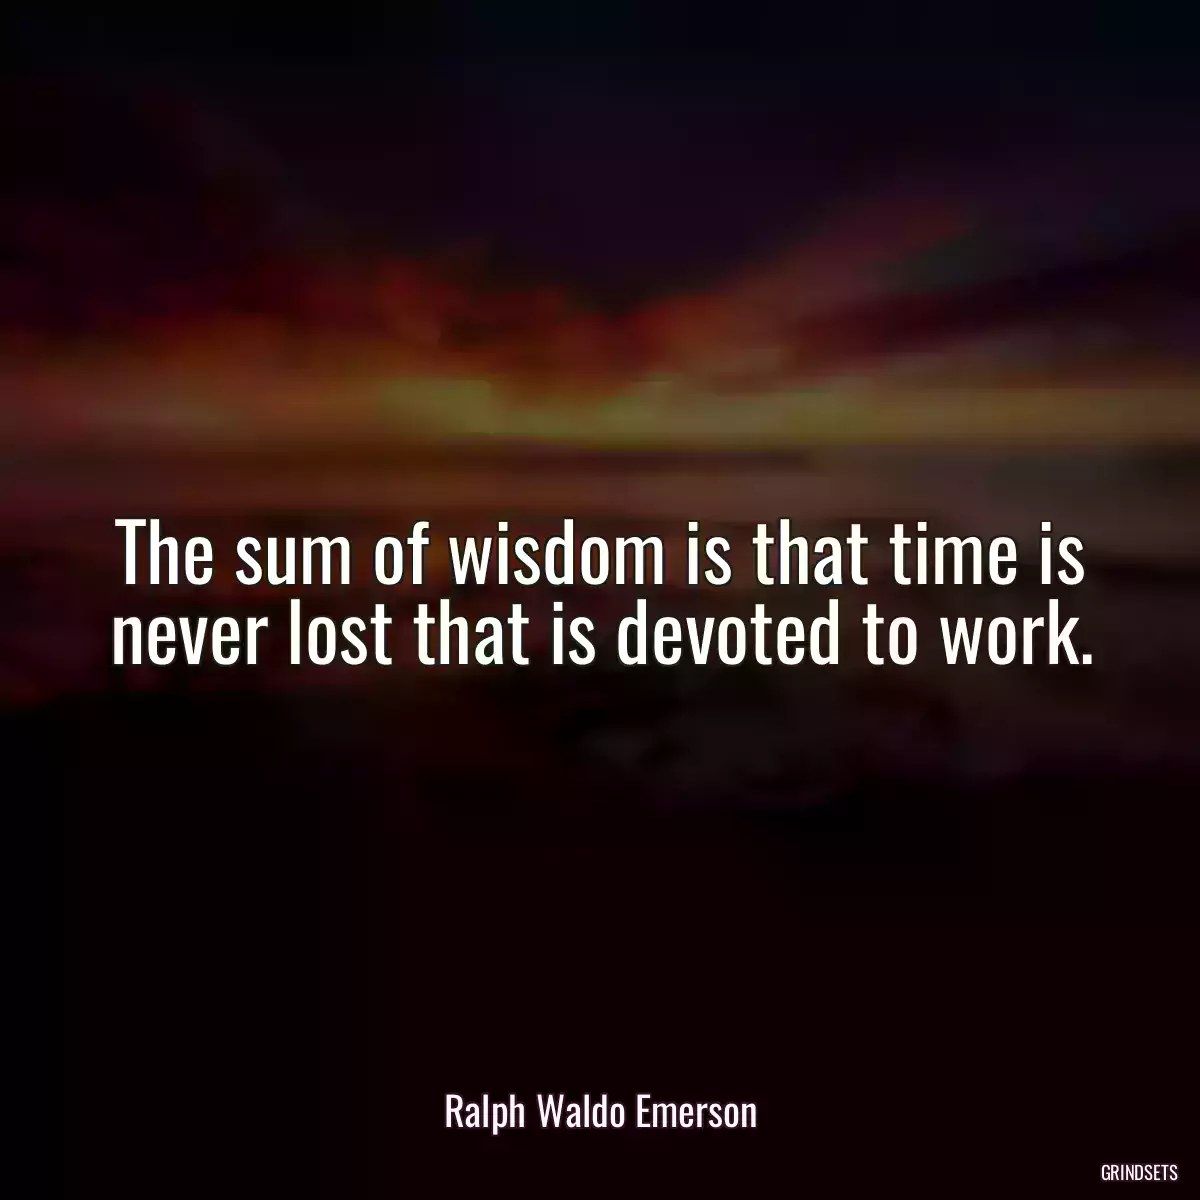 The sum of wisdom is that time is never lost that is devoted to work.